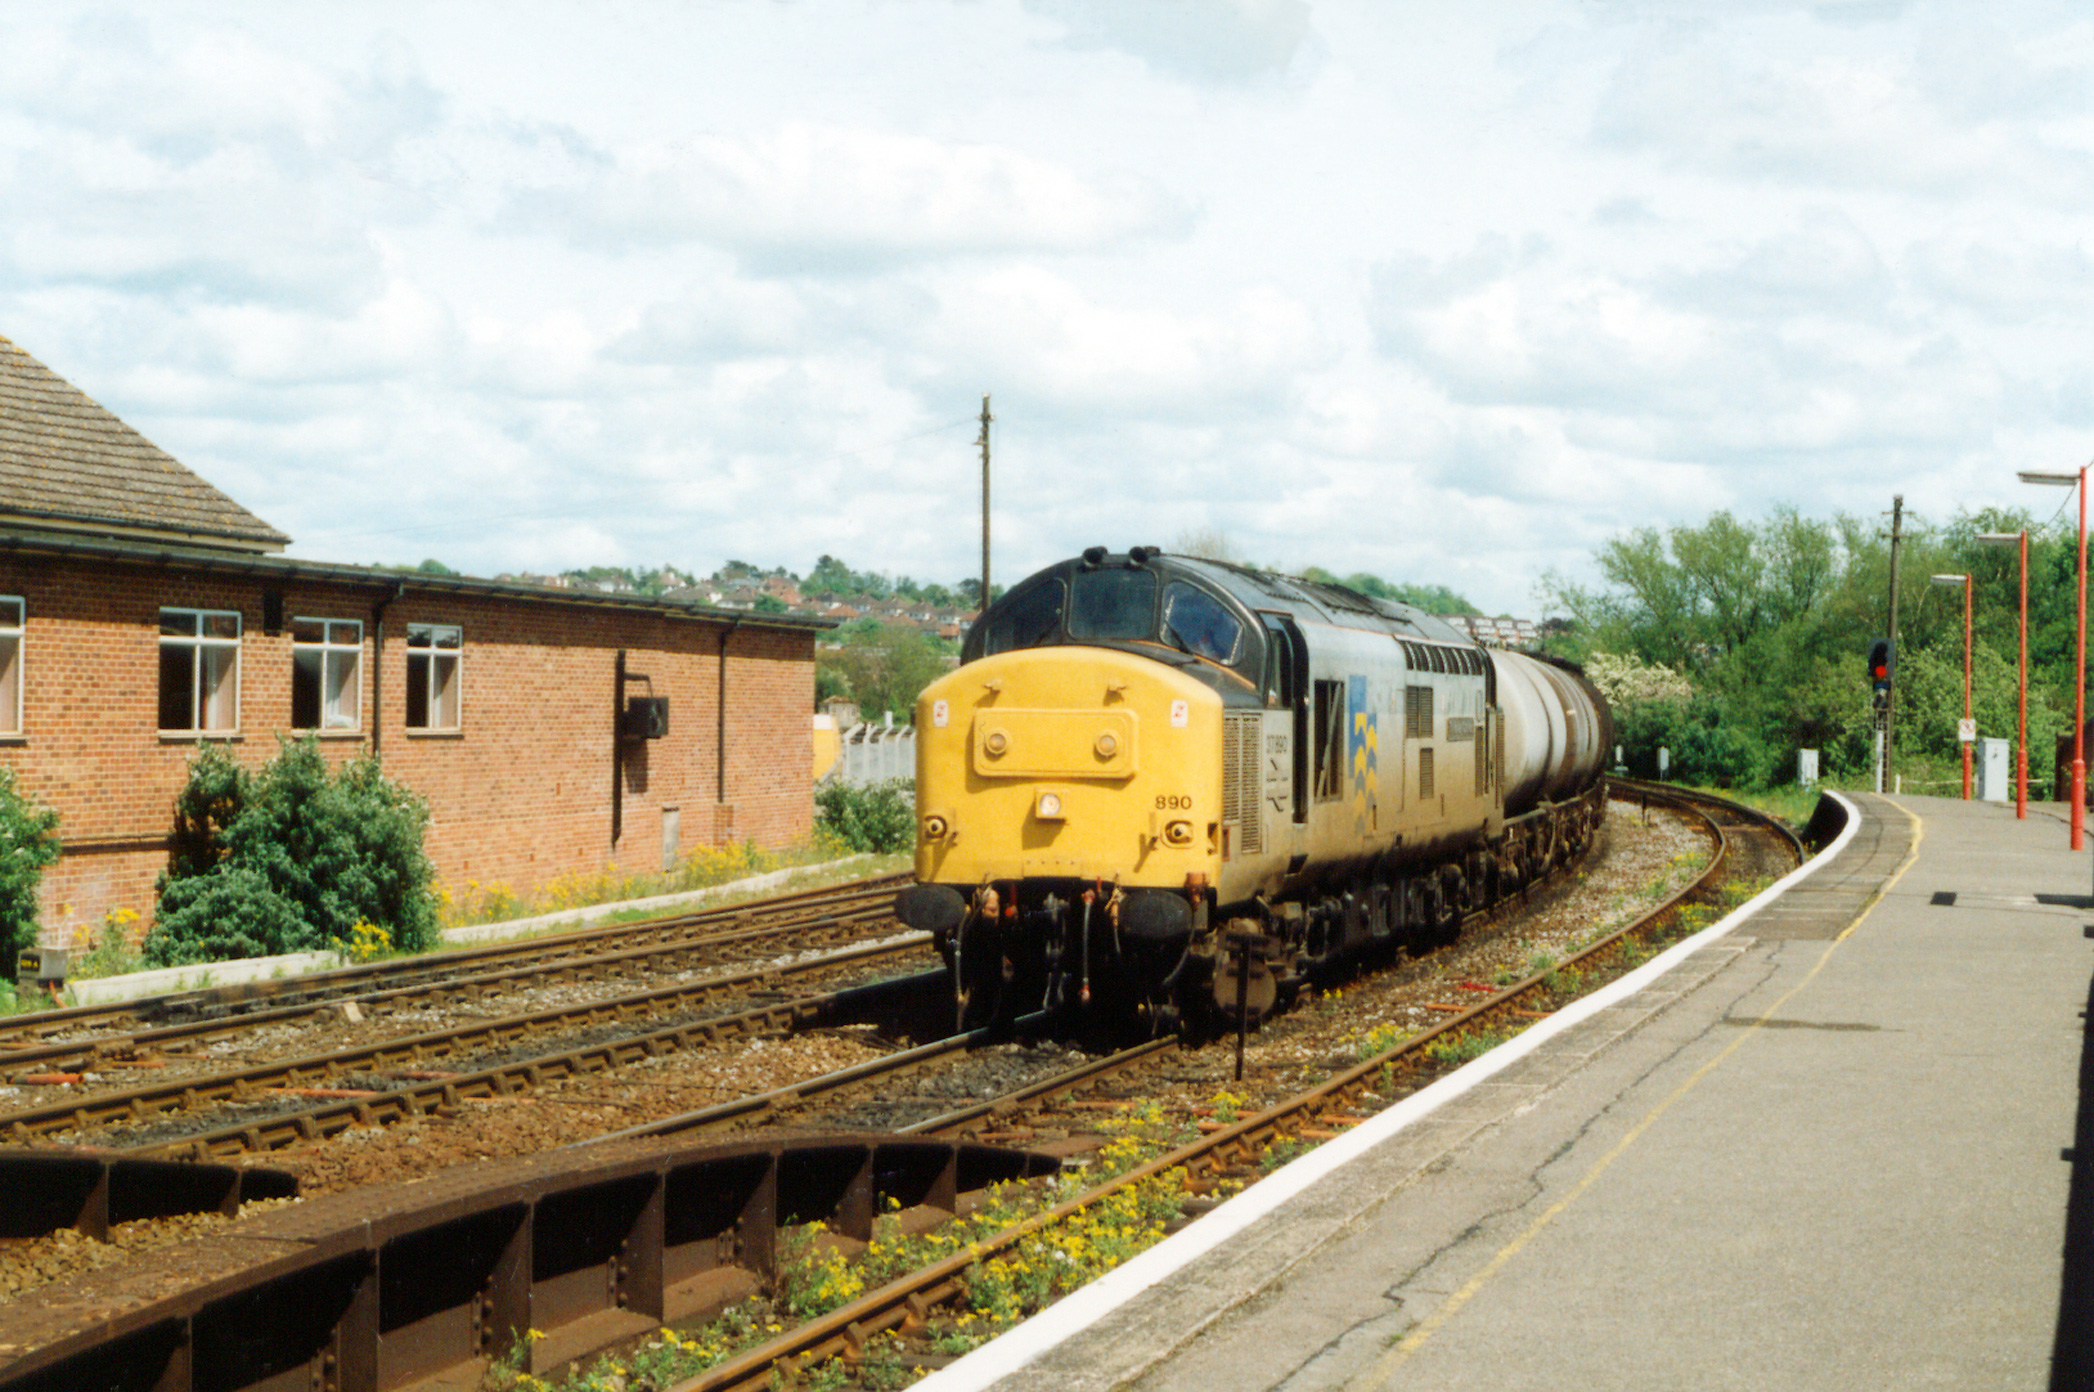 37890 at Salisbury with 6U62 10.37 Fawley to Tavistock Junction loaded oil tanks, 12th May 1994. John N Smith
37890 hauled the Tavistock Junction oil tanks more than any other working recorded in the 37890 Log; it was also the most frequent locomotive to work that train.